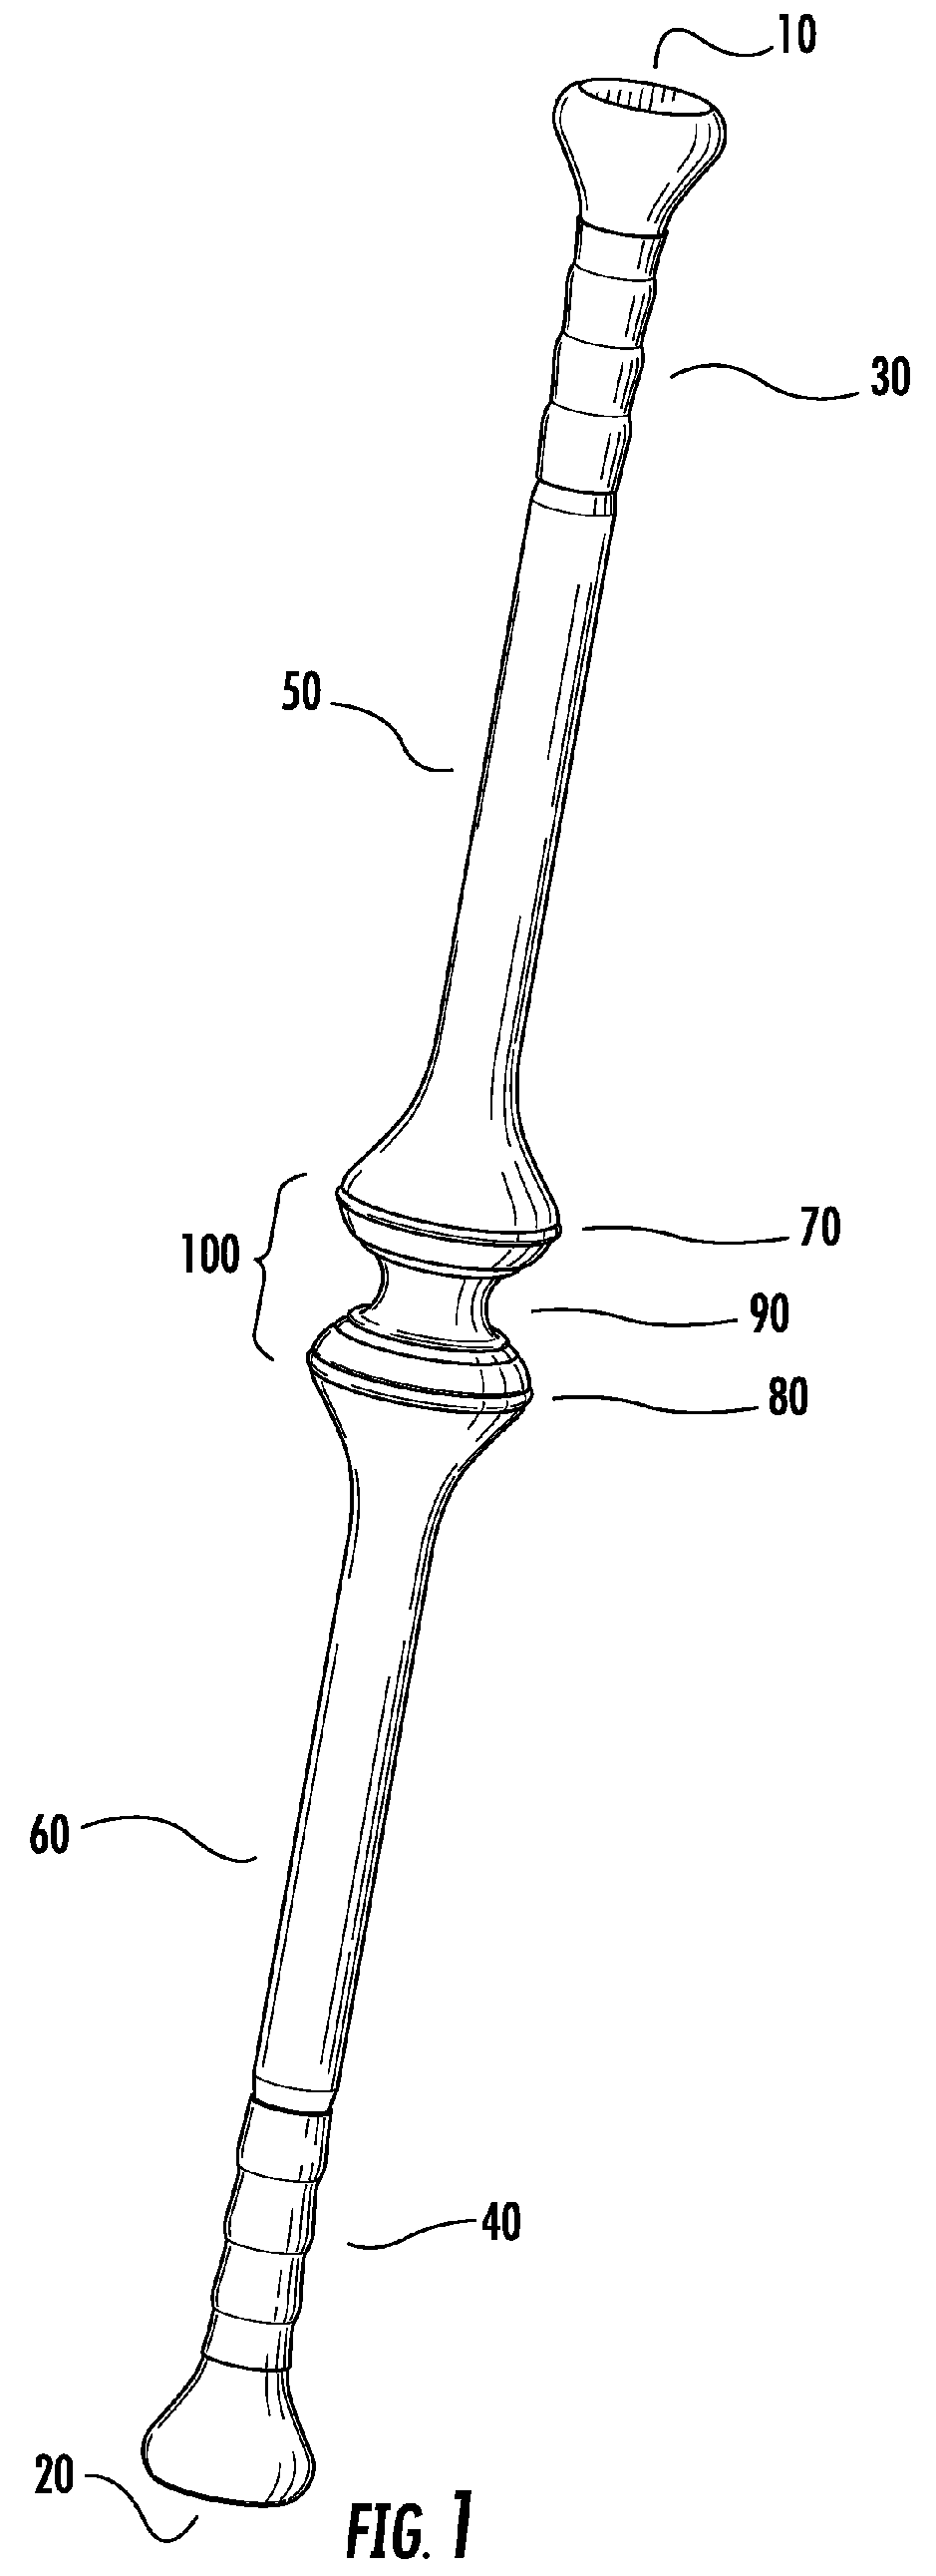 Apparatus and method directed to an exercise and stretching therapy bar